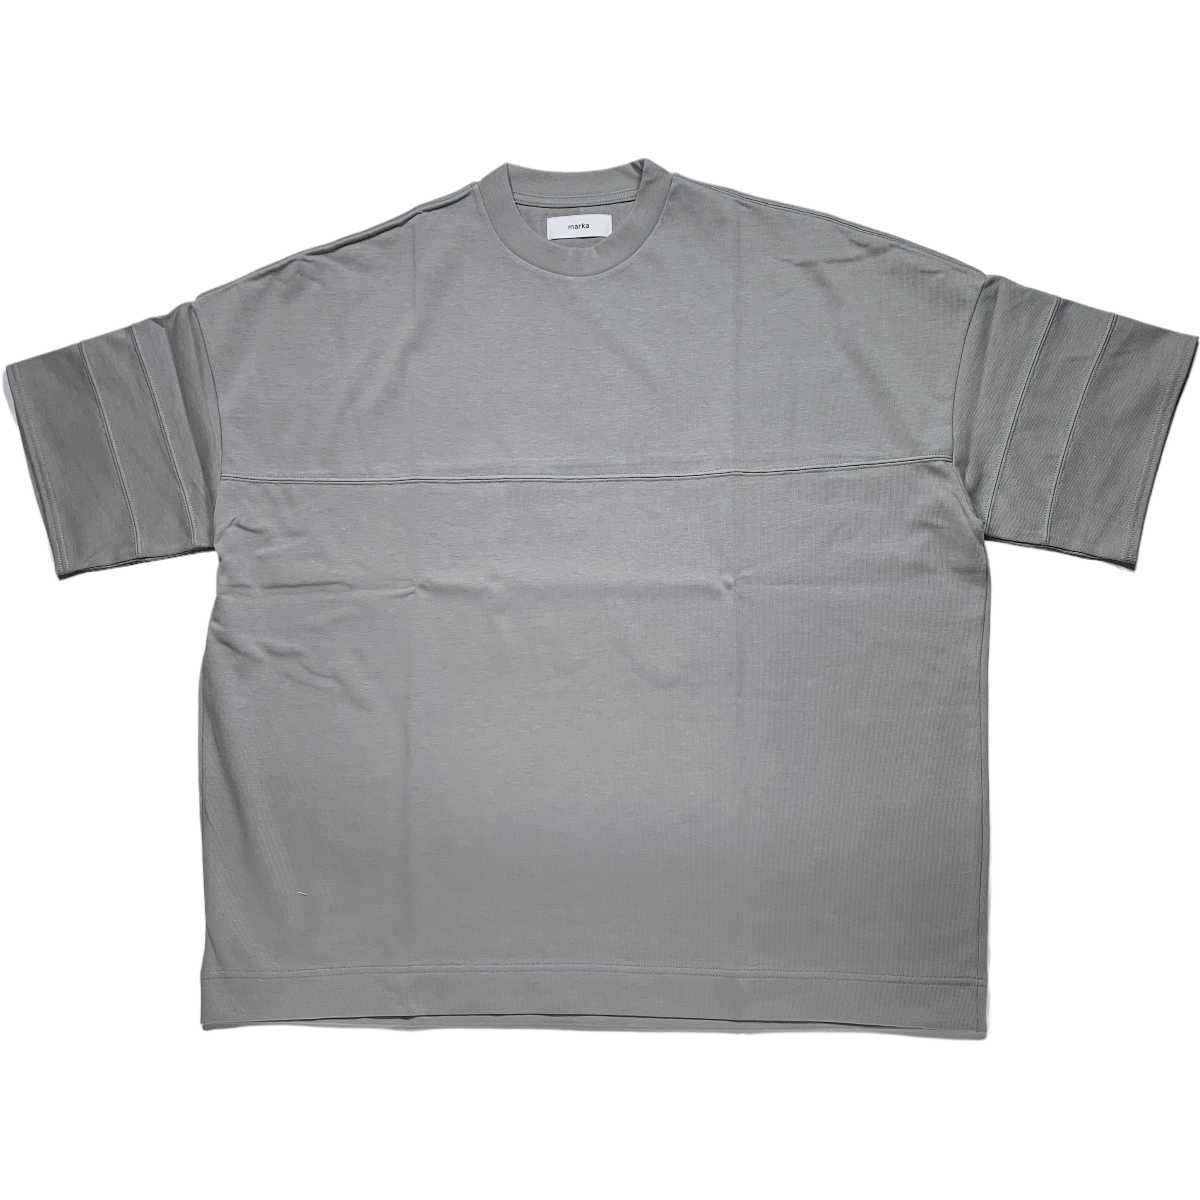 marka <BR>FOOTBALL TEE WIDE - 20/1 RECYCLE SUVIN ORGANIC COTTON KNIT - (SKY GRAY)